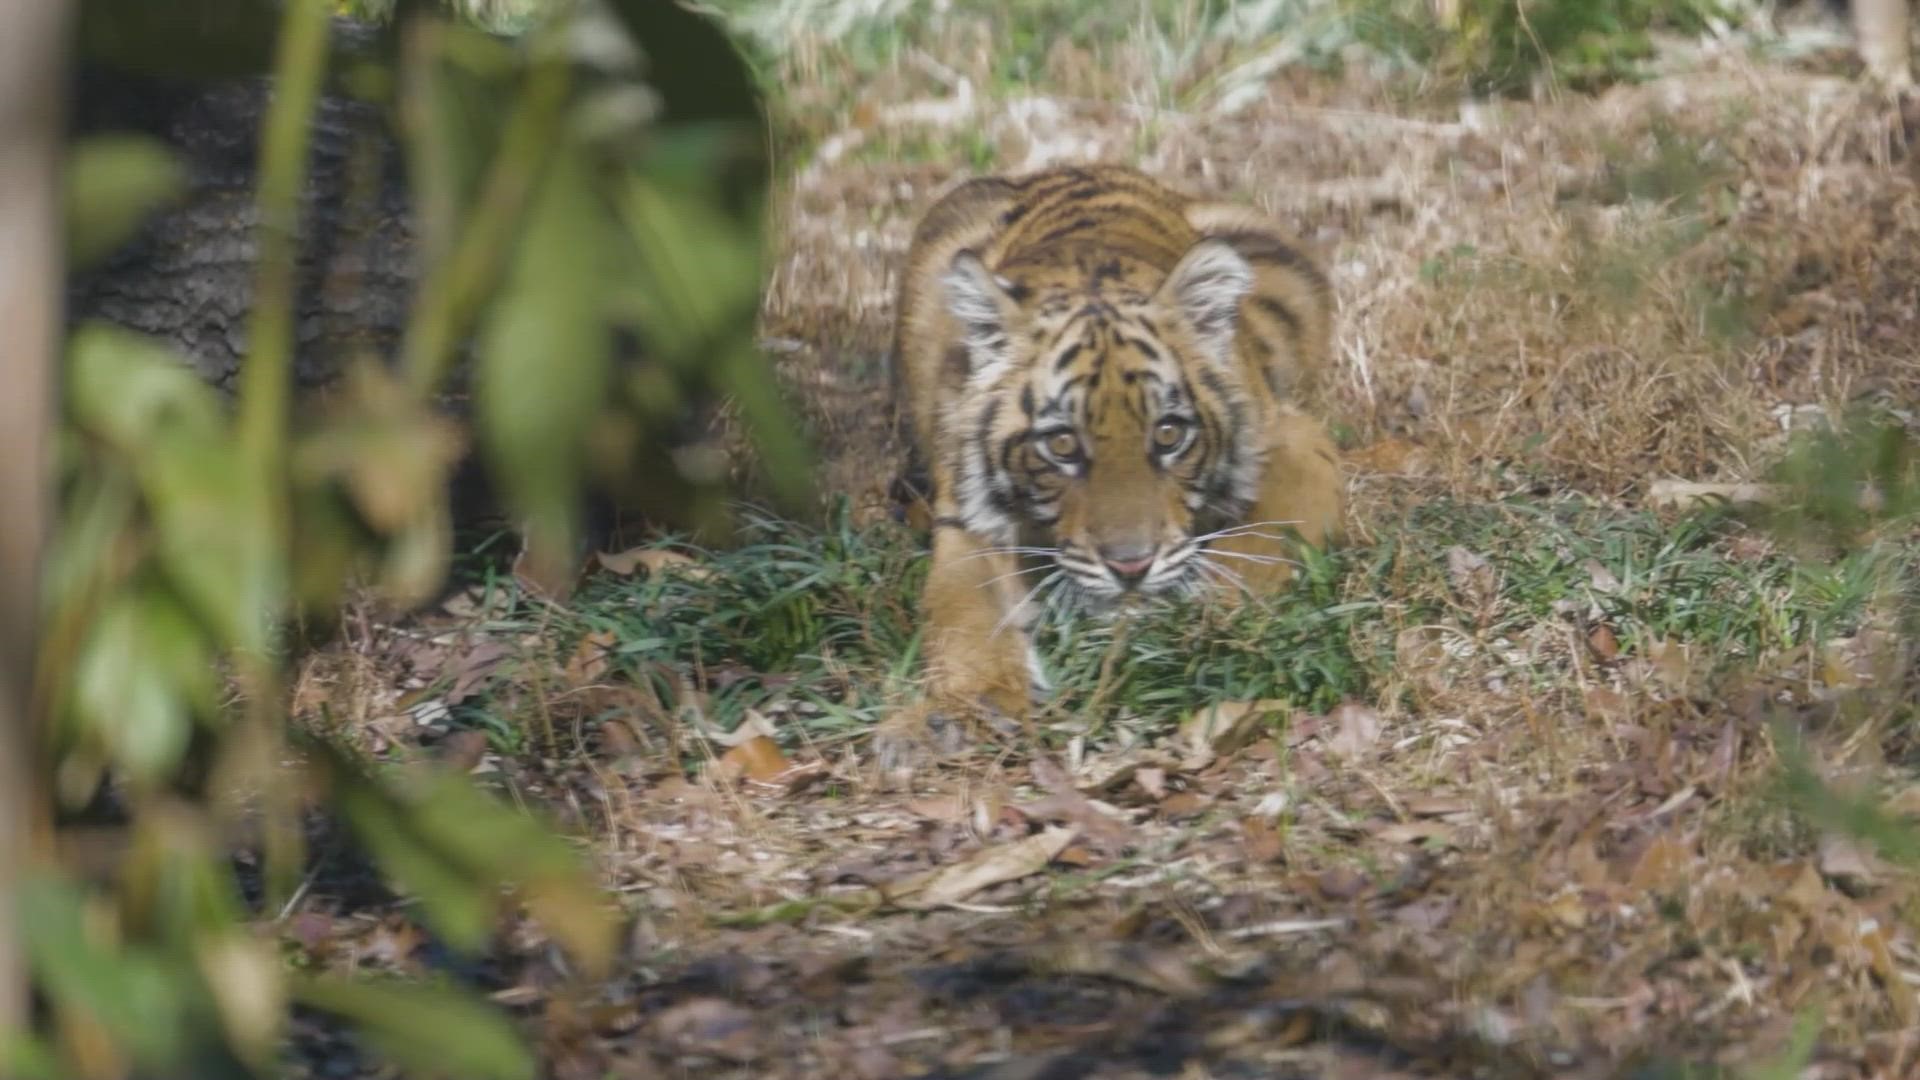 Six-month-old critically endangered Sumatran tiger cub Sumini isn't a huge Matthew Stafford or Von Miller fan, turns out. Hey, there's always next year, Rams!